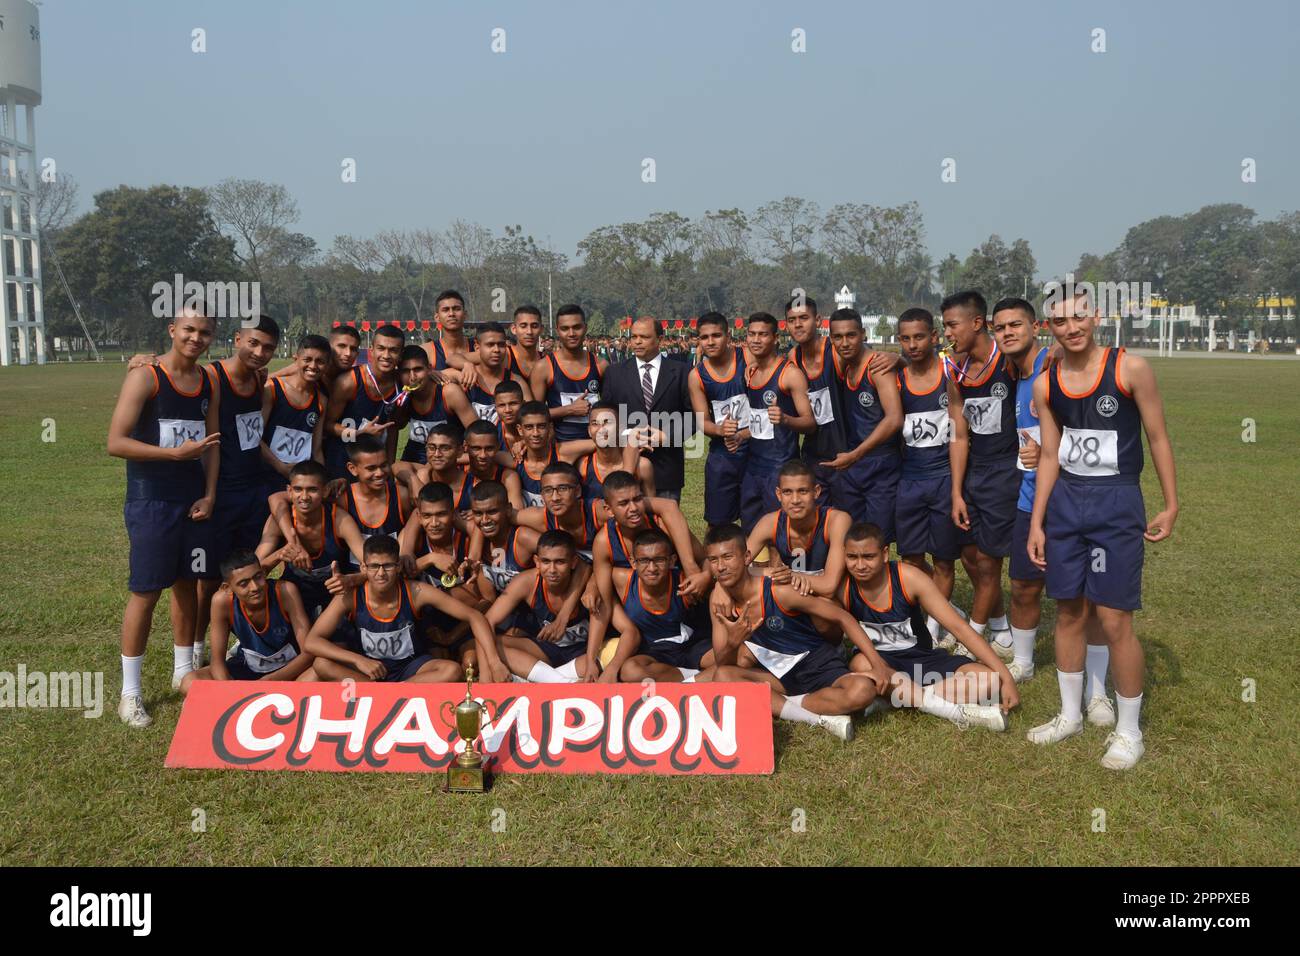 Inter-house cross-country running competition of Rangpur Cadet College students. Stock Photo